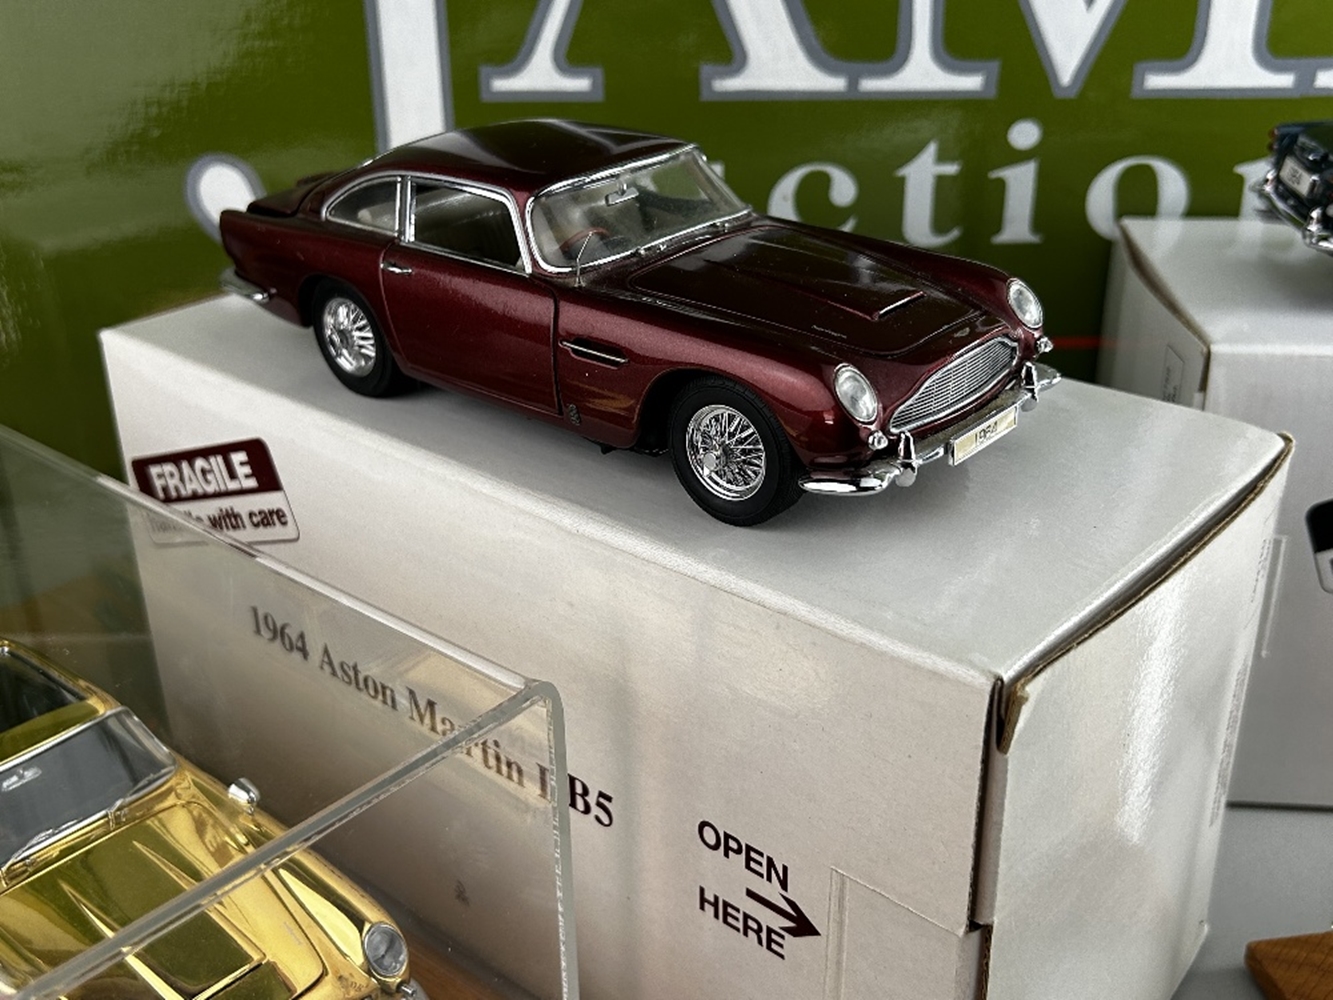 Danbury Mint 1964 Aston Martin DB5 Complete Collection - Image 5 of 8